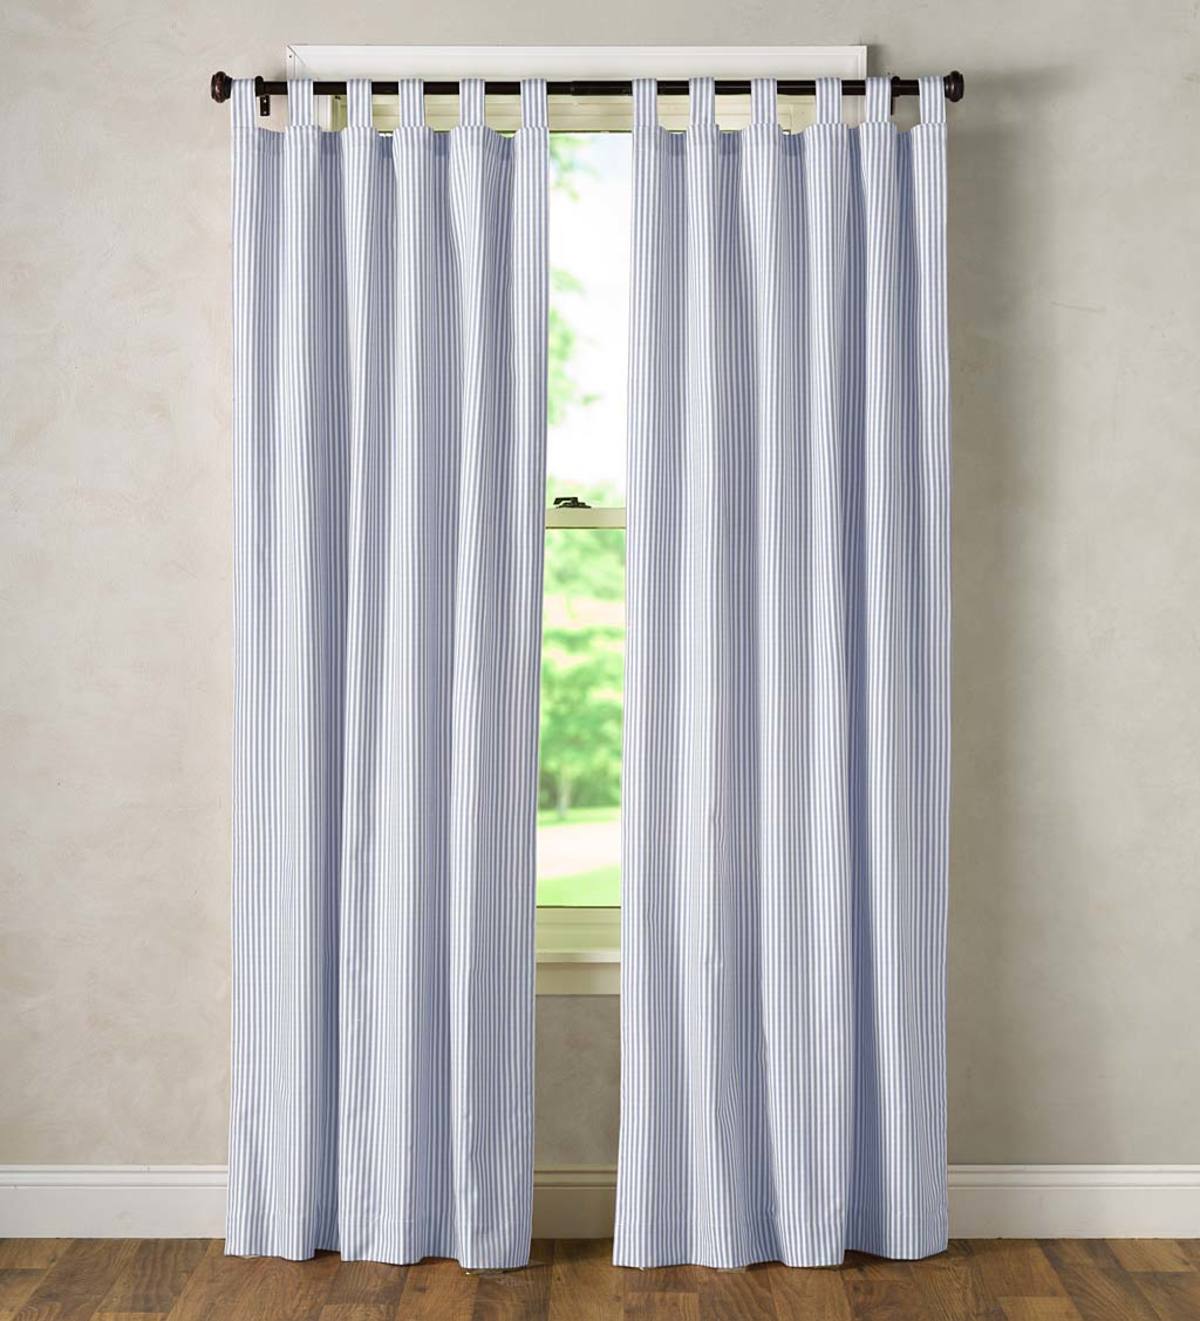 Thermalogic Insulated Ticking Stripe Tab Top Curtain Pair, 95"L